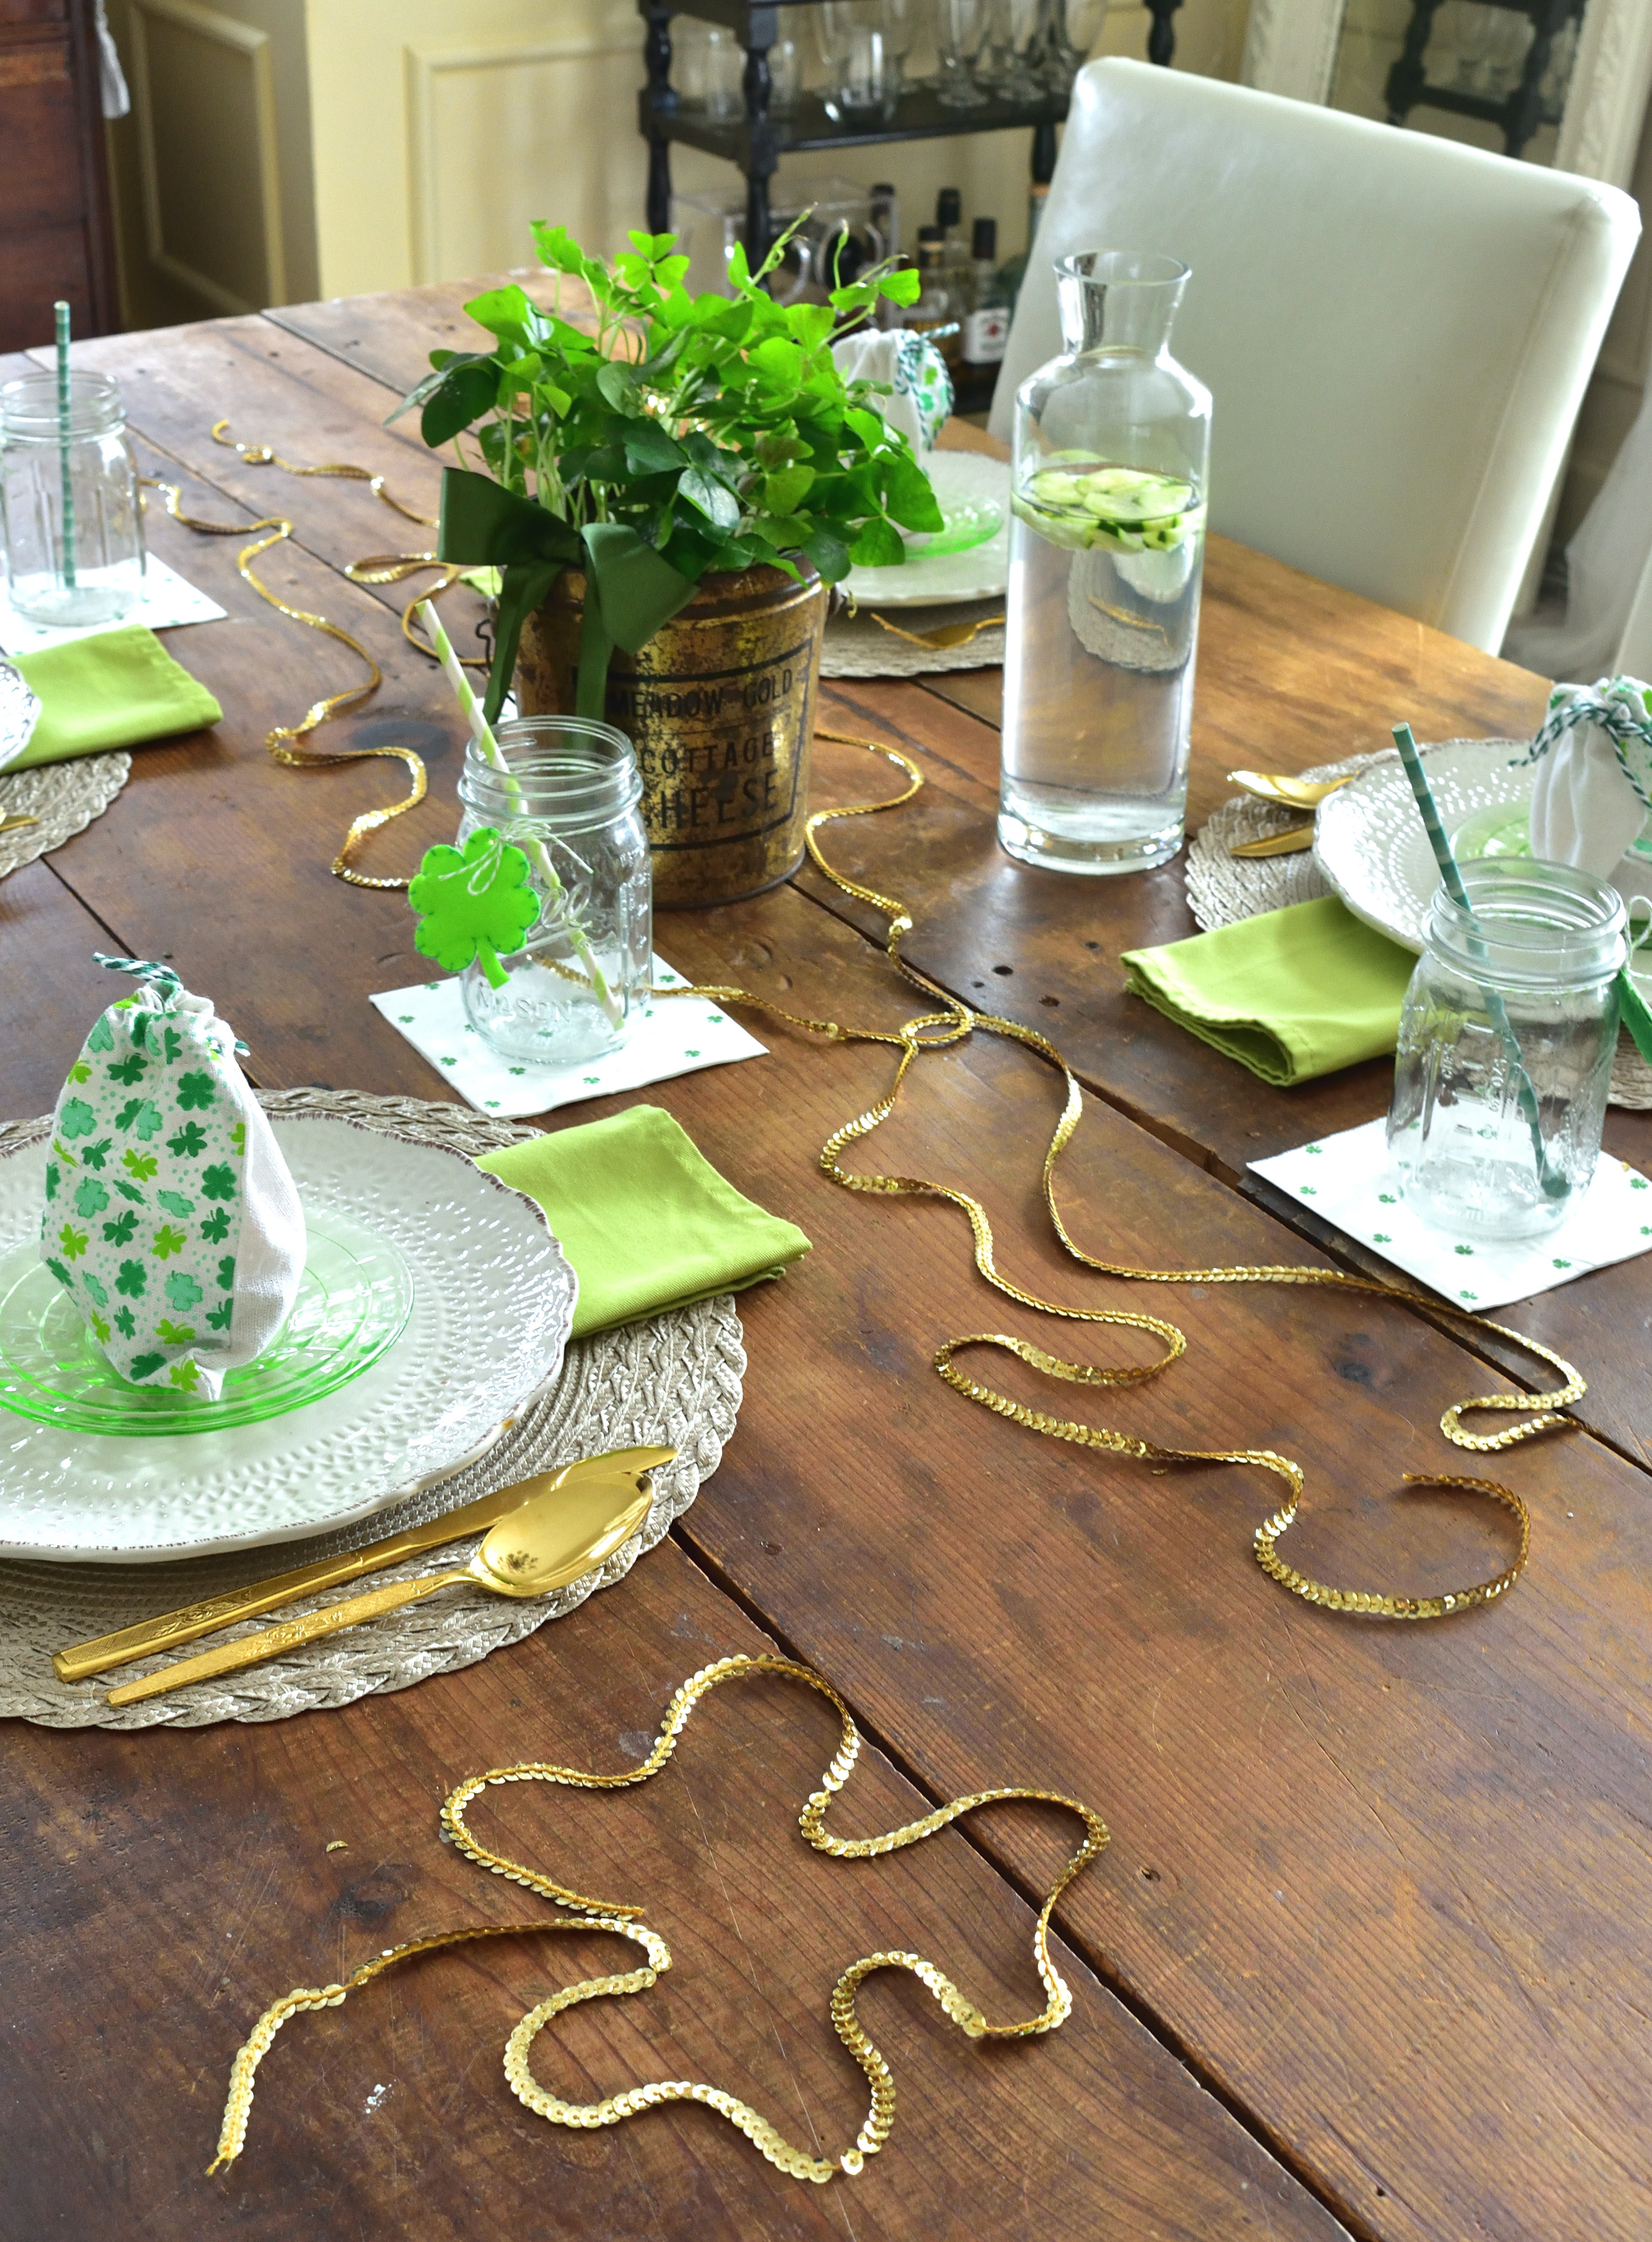 St. Paddy's Day table decorations